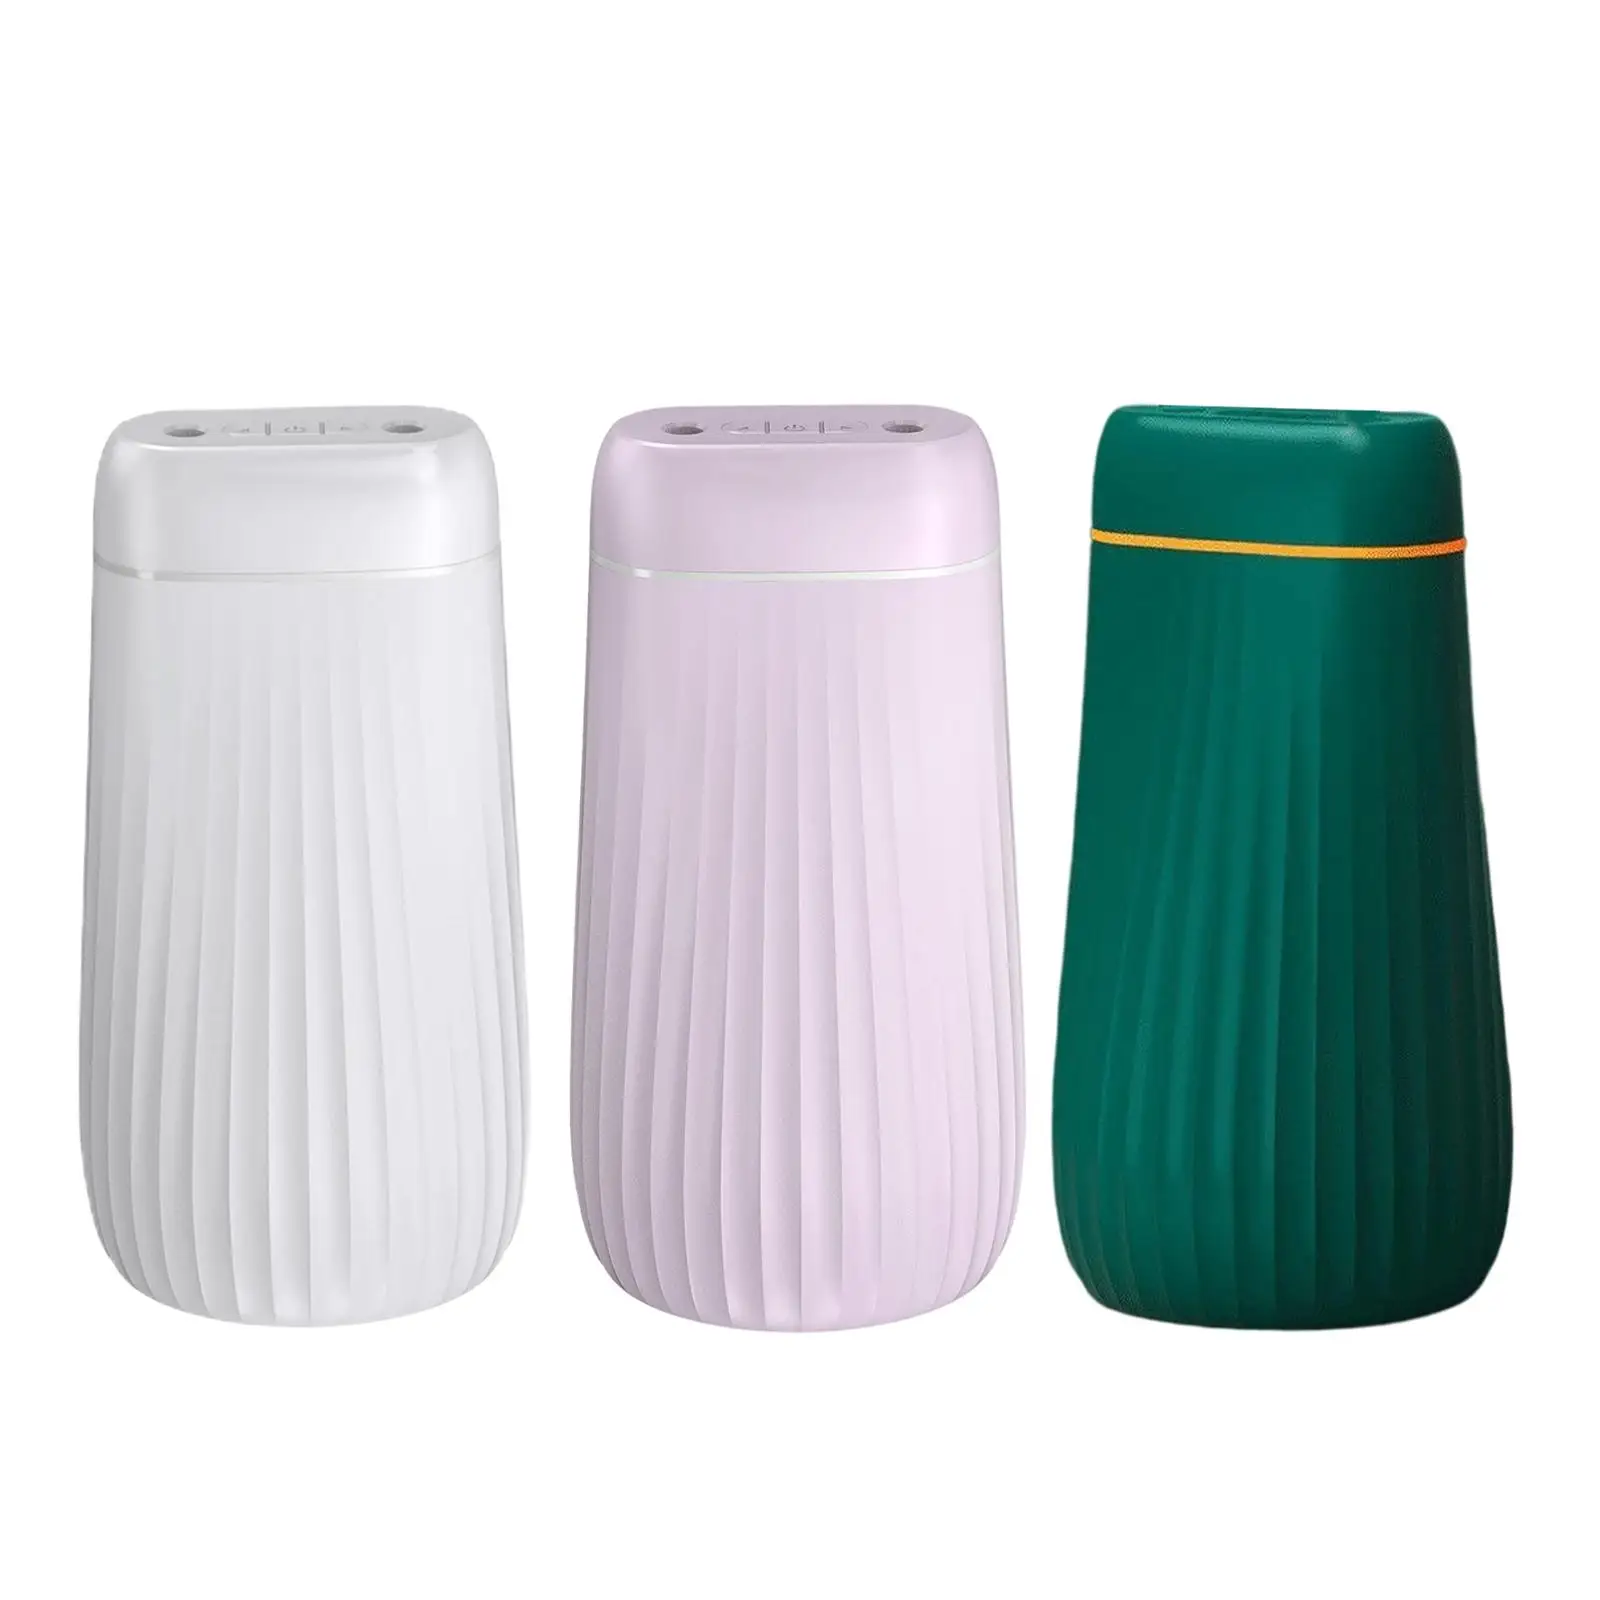 Portable Air Humidifier Aroma Diffuser USB Purifier for Desktop Travel Kitchen Bedroom Relax